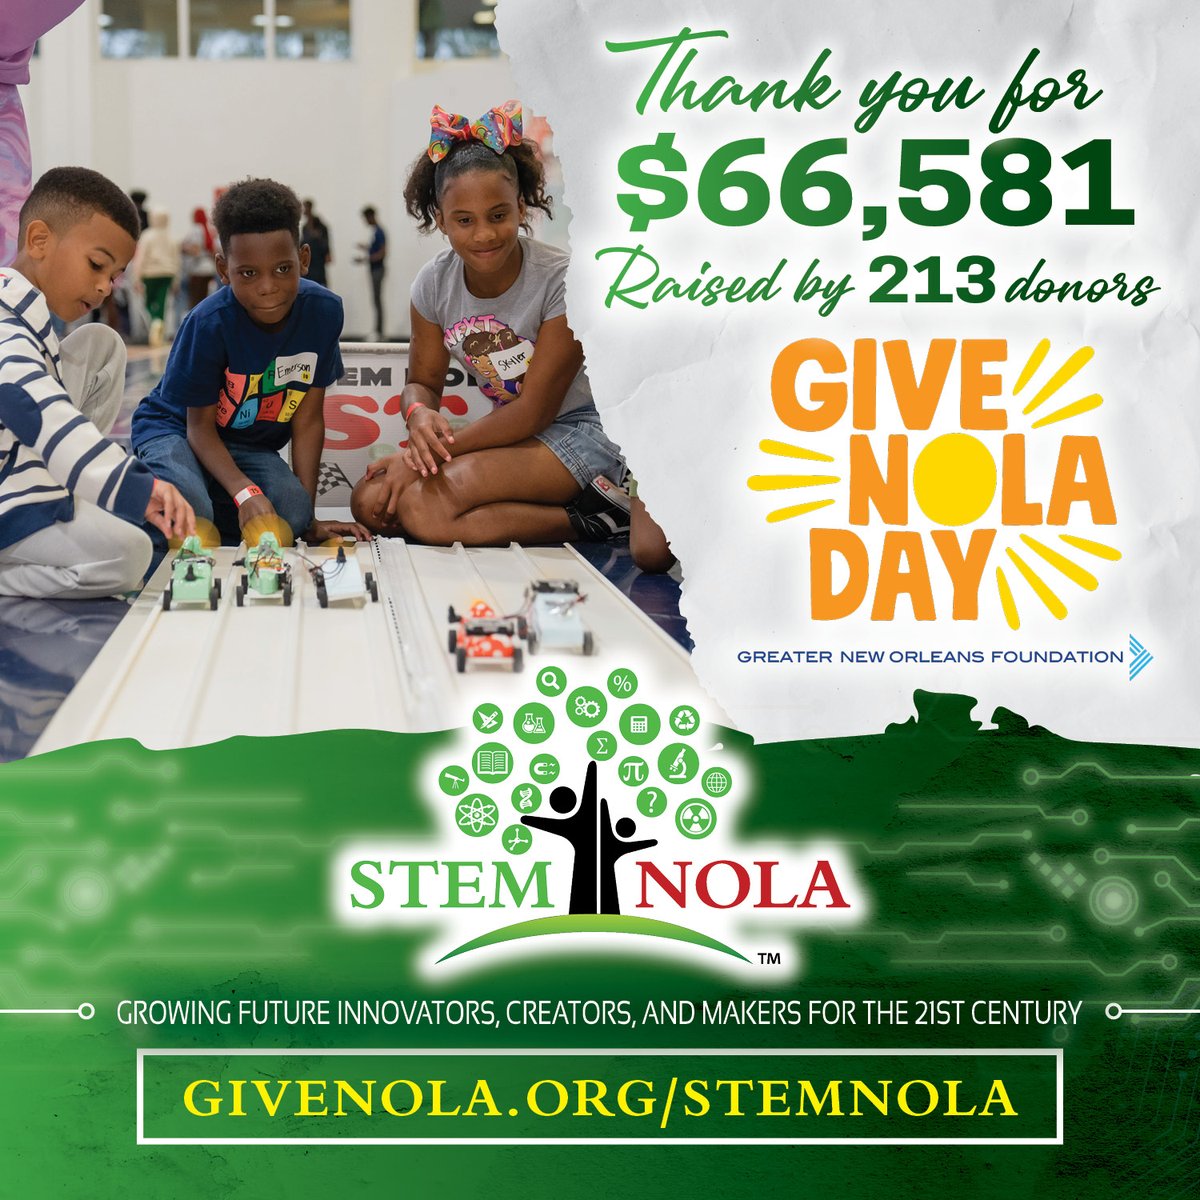 THANK YOU to the 213 donors gave $66,581 to support STEM NOLA in carrying out our mission! Your donations serve as a testament to your belief in our mission to expose, inspire, and engage the next generation of innovators, creators, and makers.

#STEMforALL #YOUbelonginSTEM